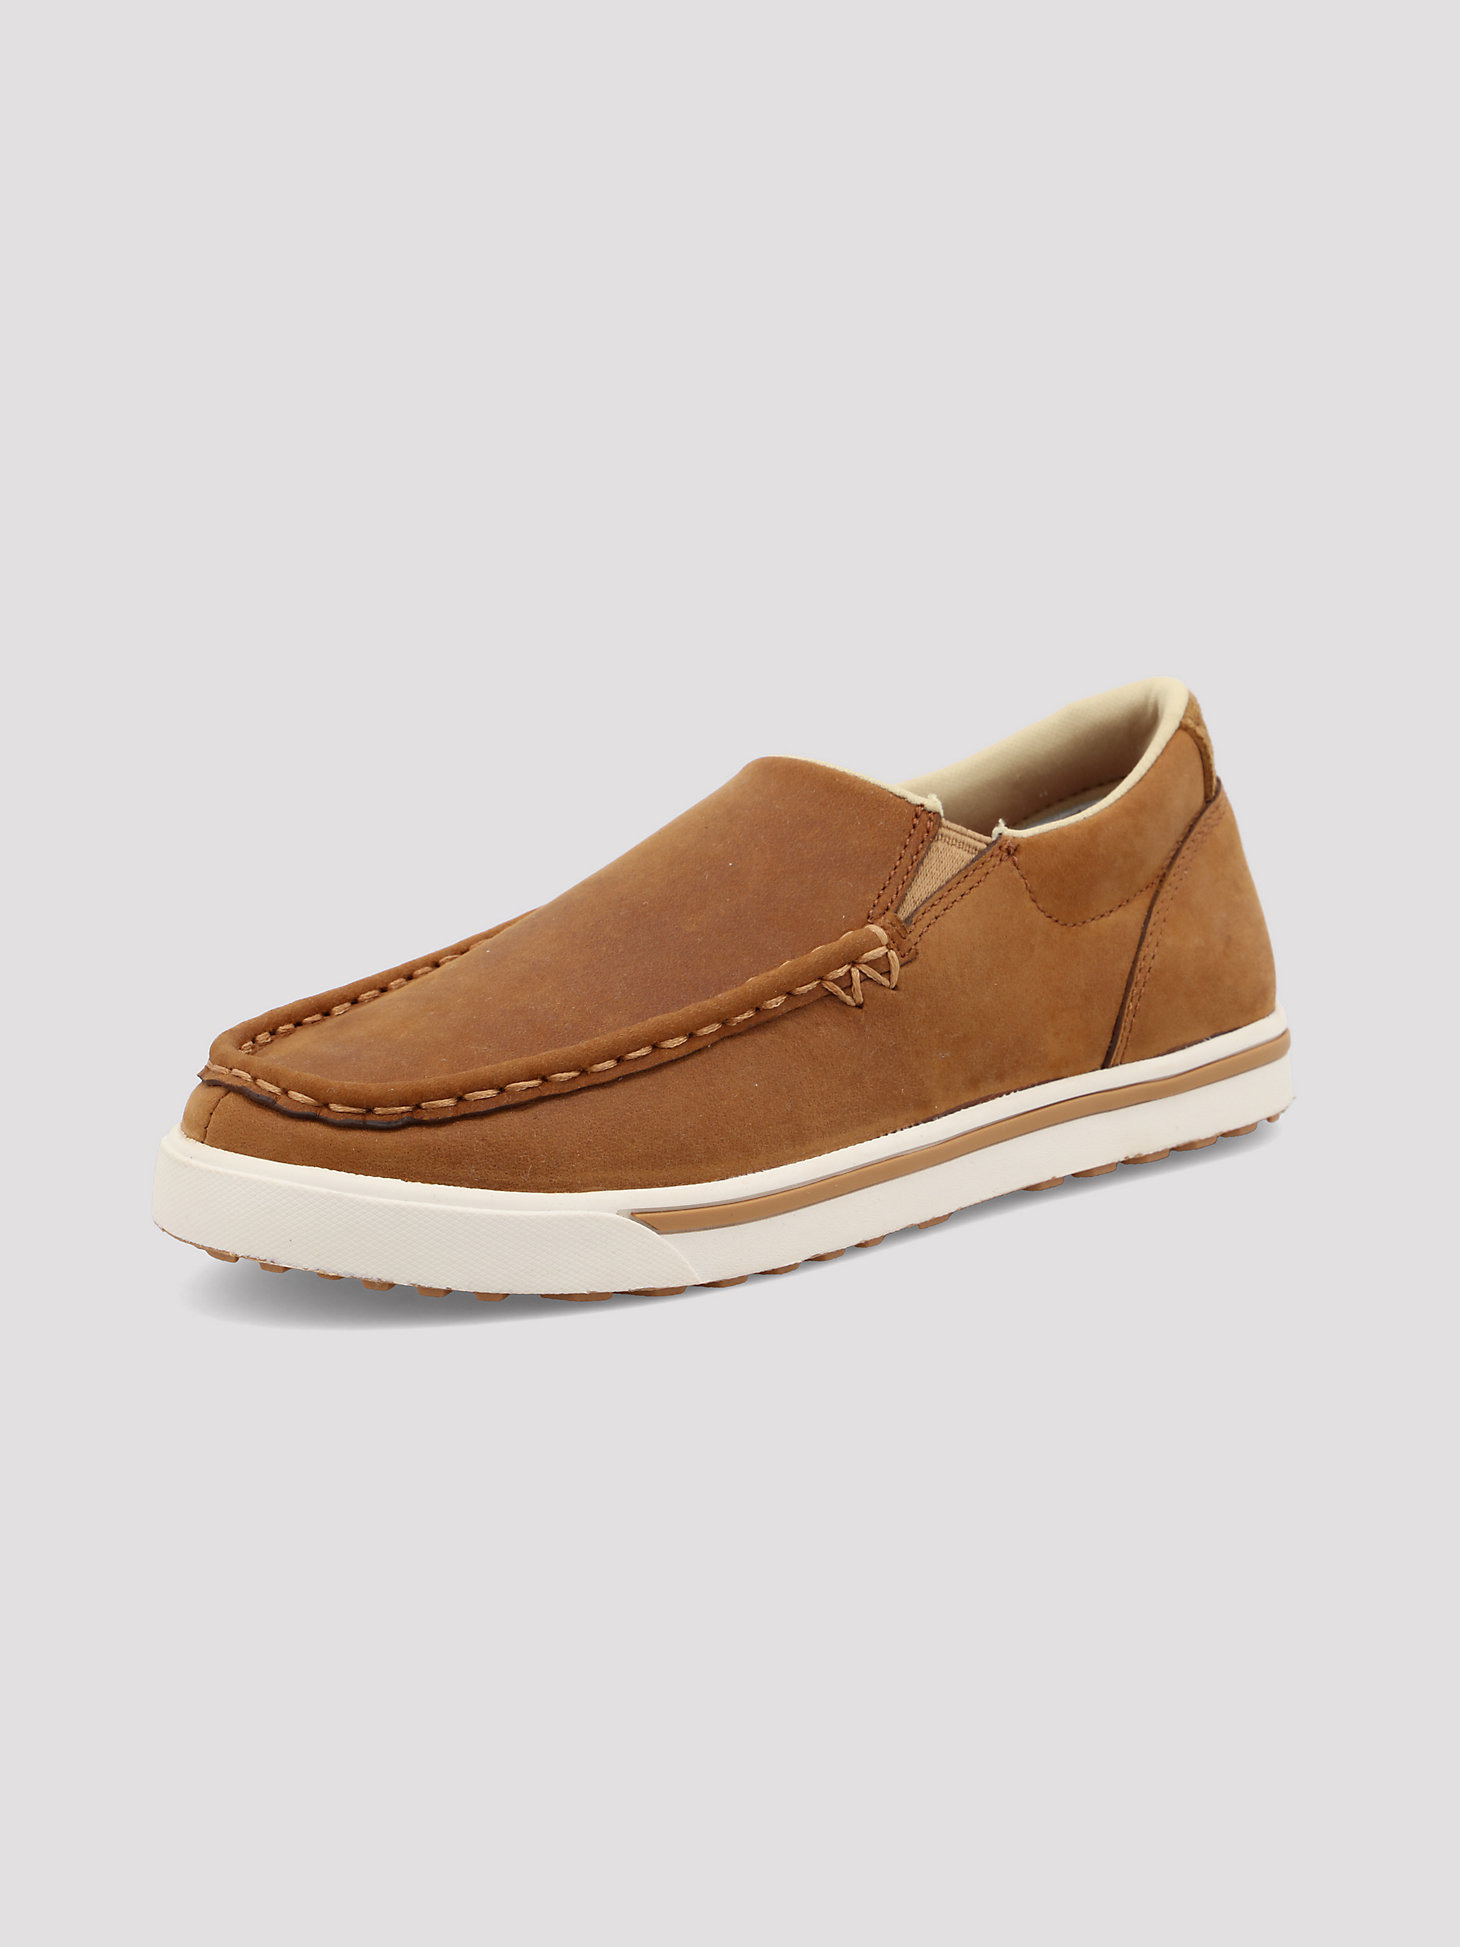 Kids Leather Slip On Shoe in Cognac main view